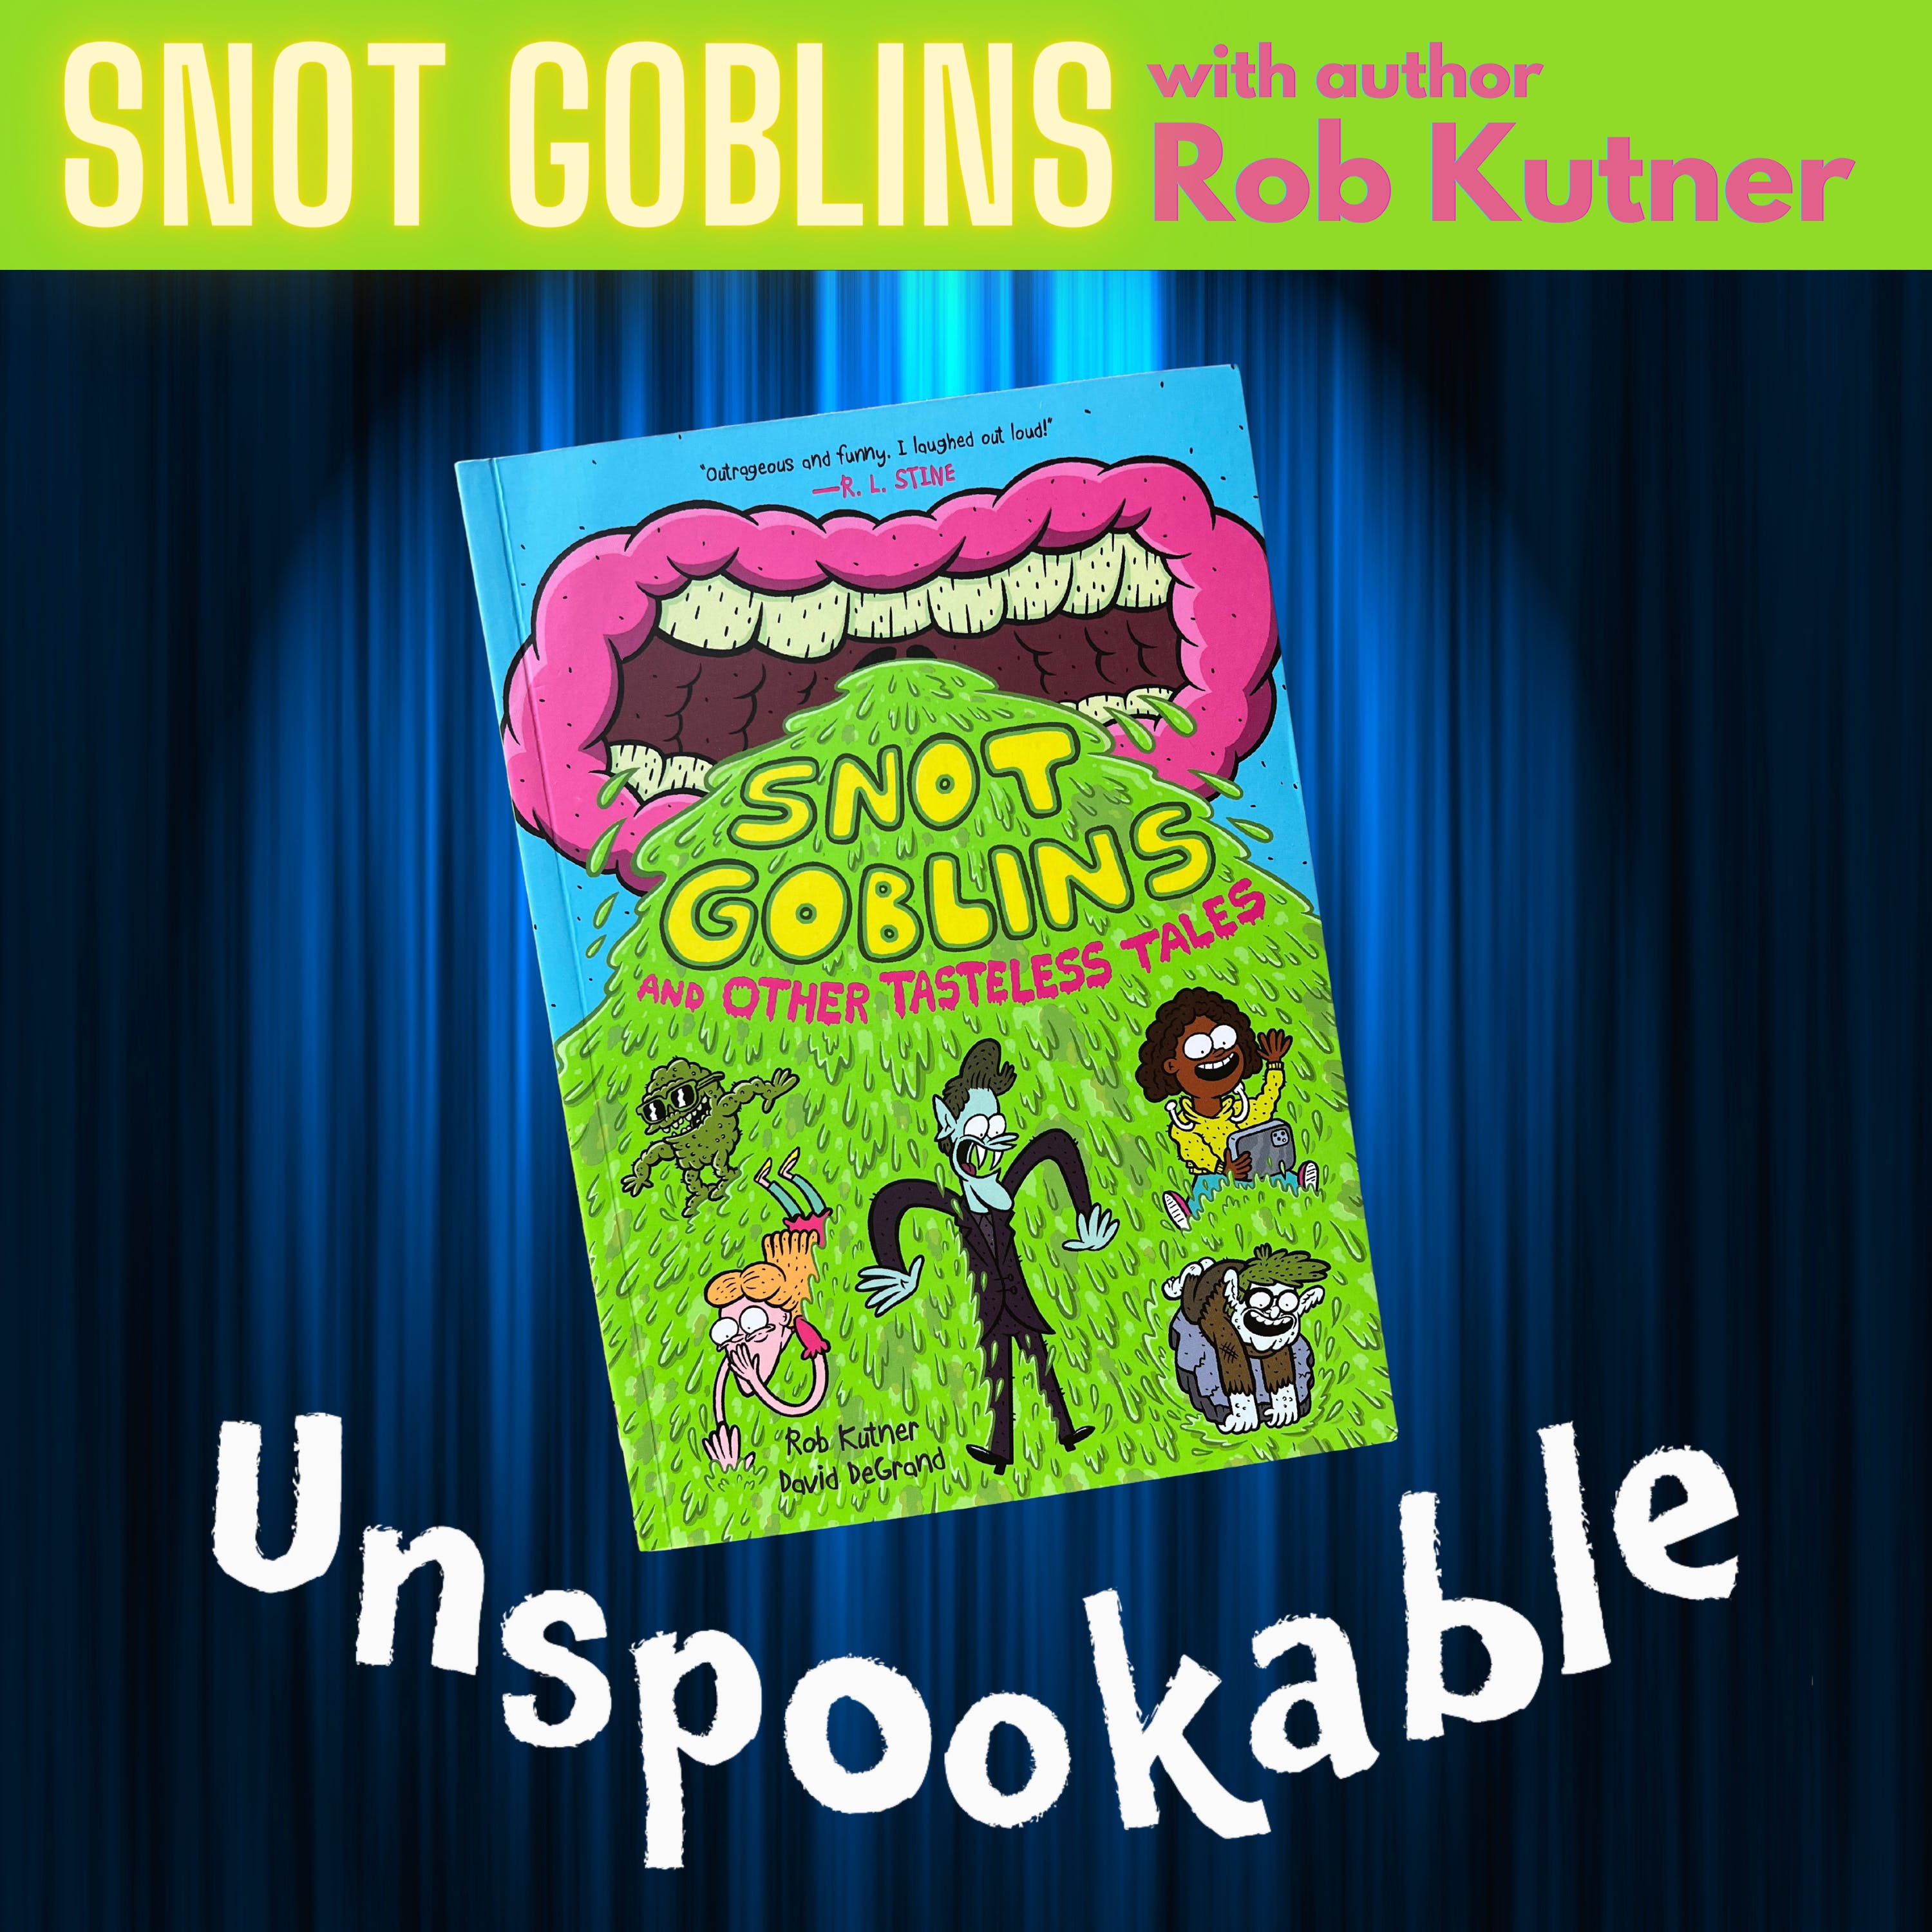 Episode 48: Snot Goblins with Rob Kutner